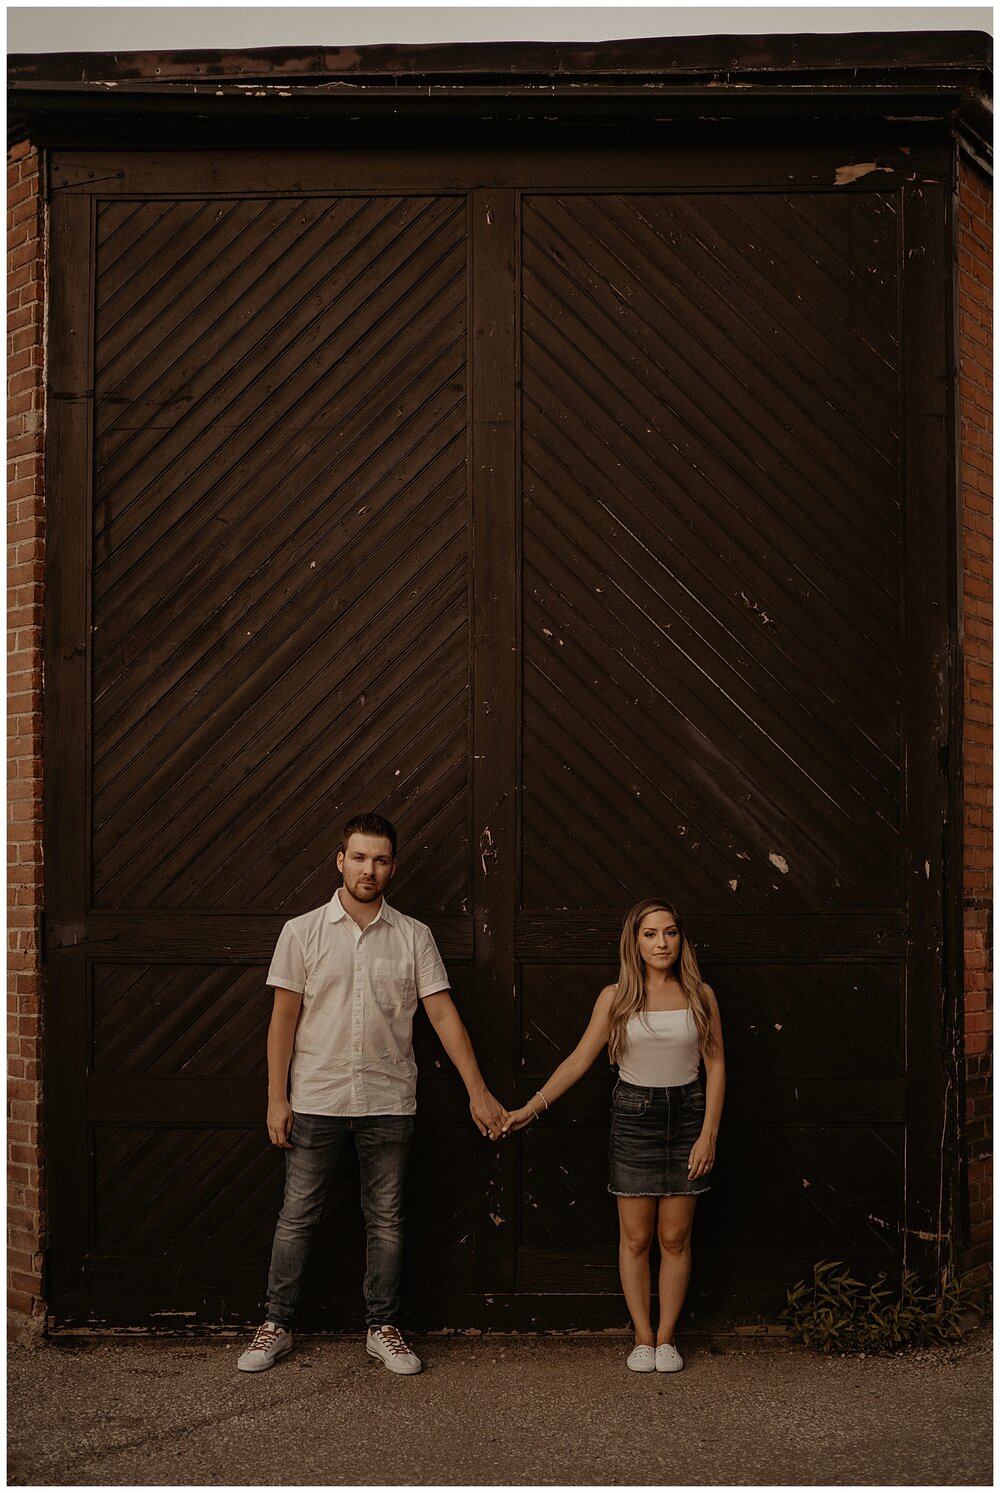 Cotton_Factory_And_Waterfall_Engagement_Session_Hamilton_Ontario_Wedding_Photographer_0082.jpg